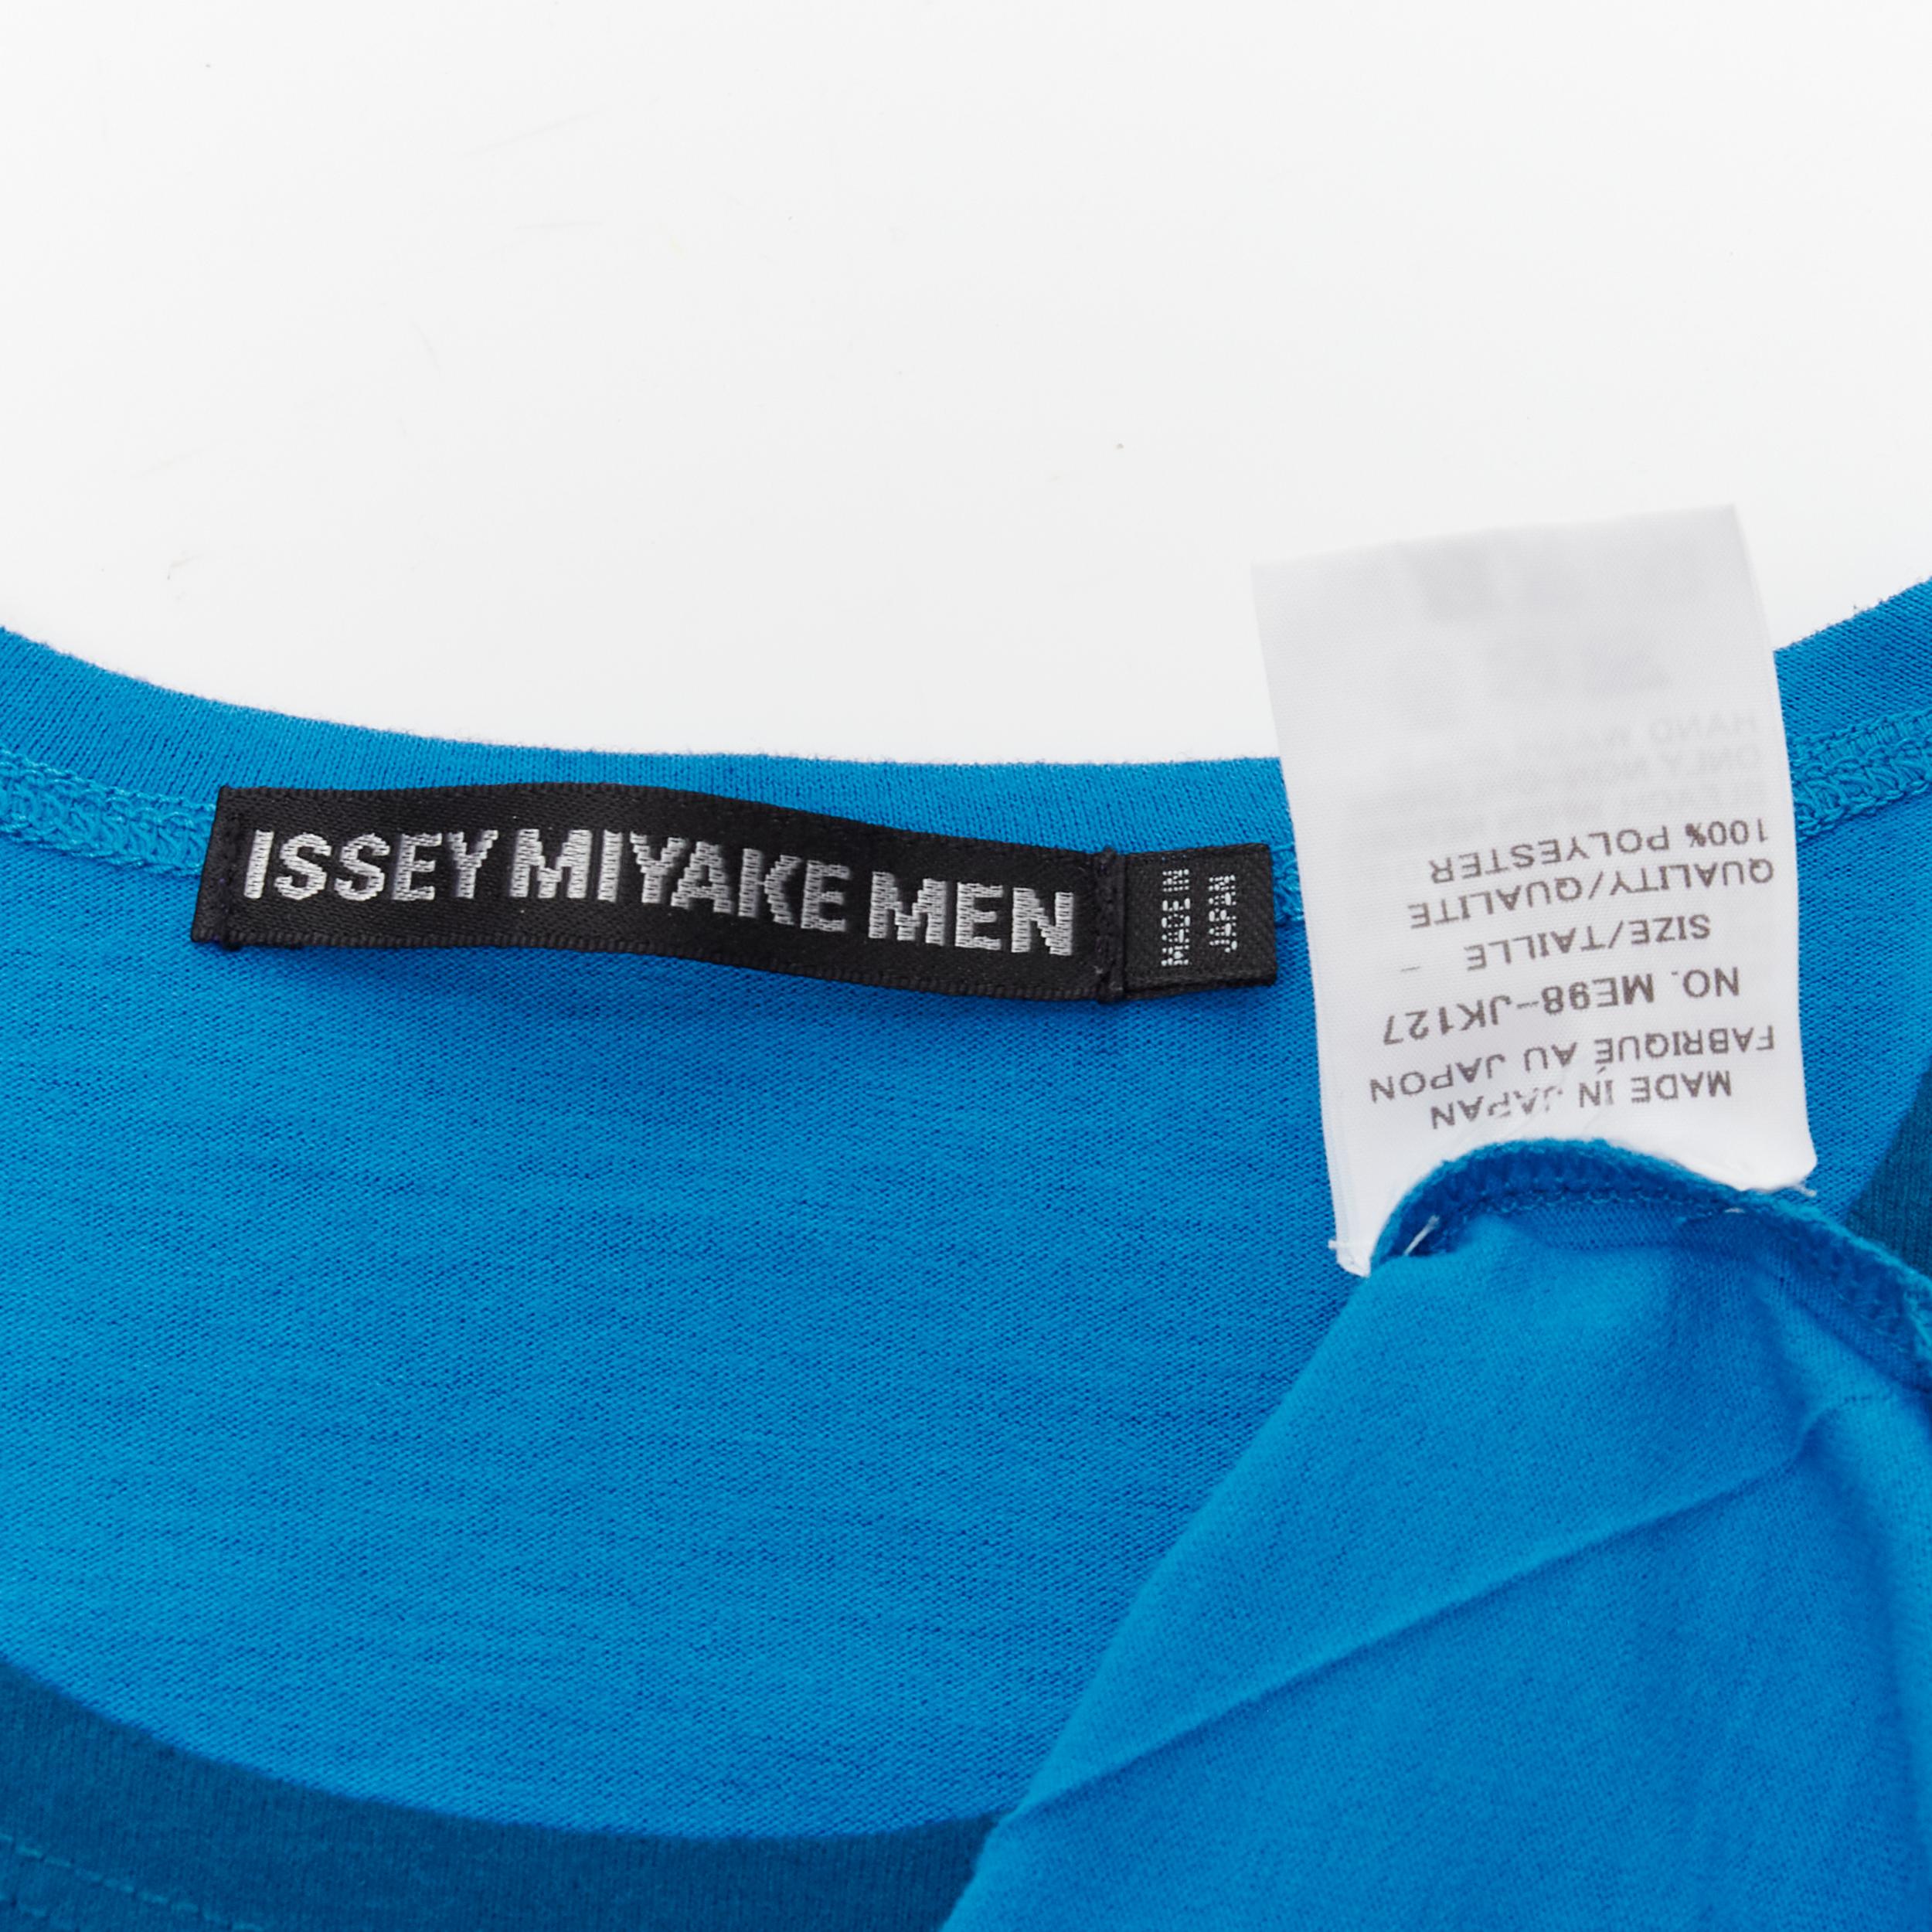 ISSEY MIYAKE MEN blue bonded pleat graphic print tshirt M For Sale 5